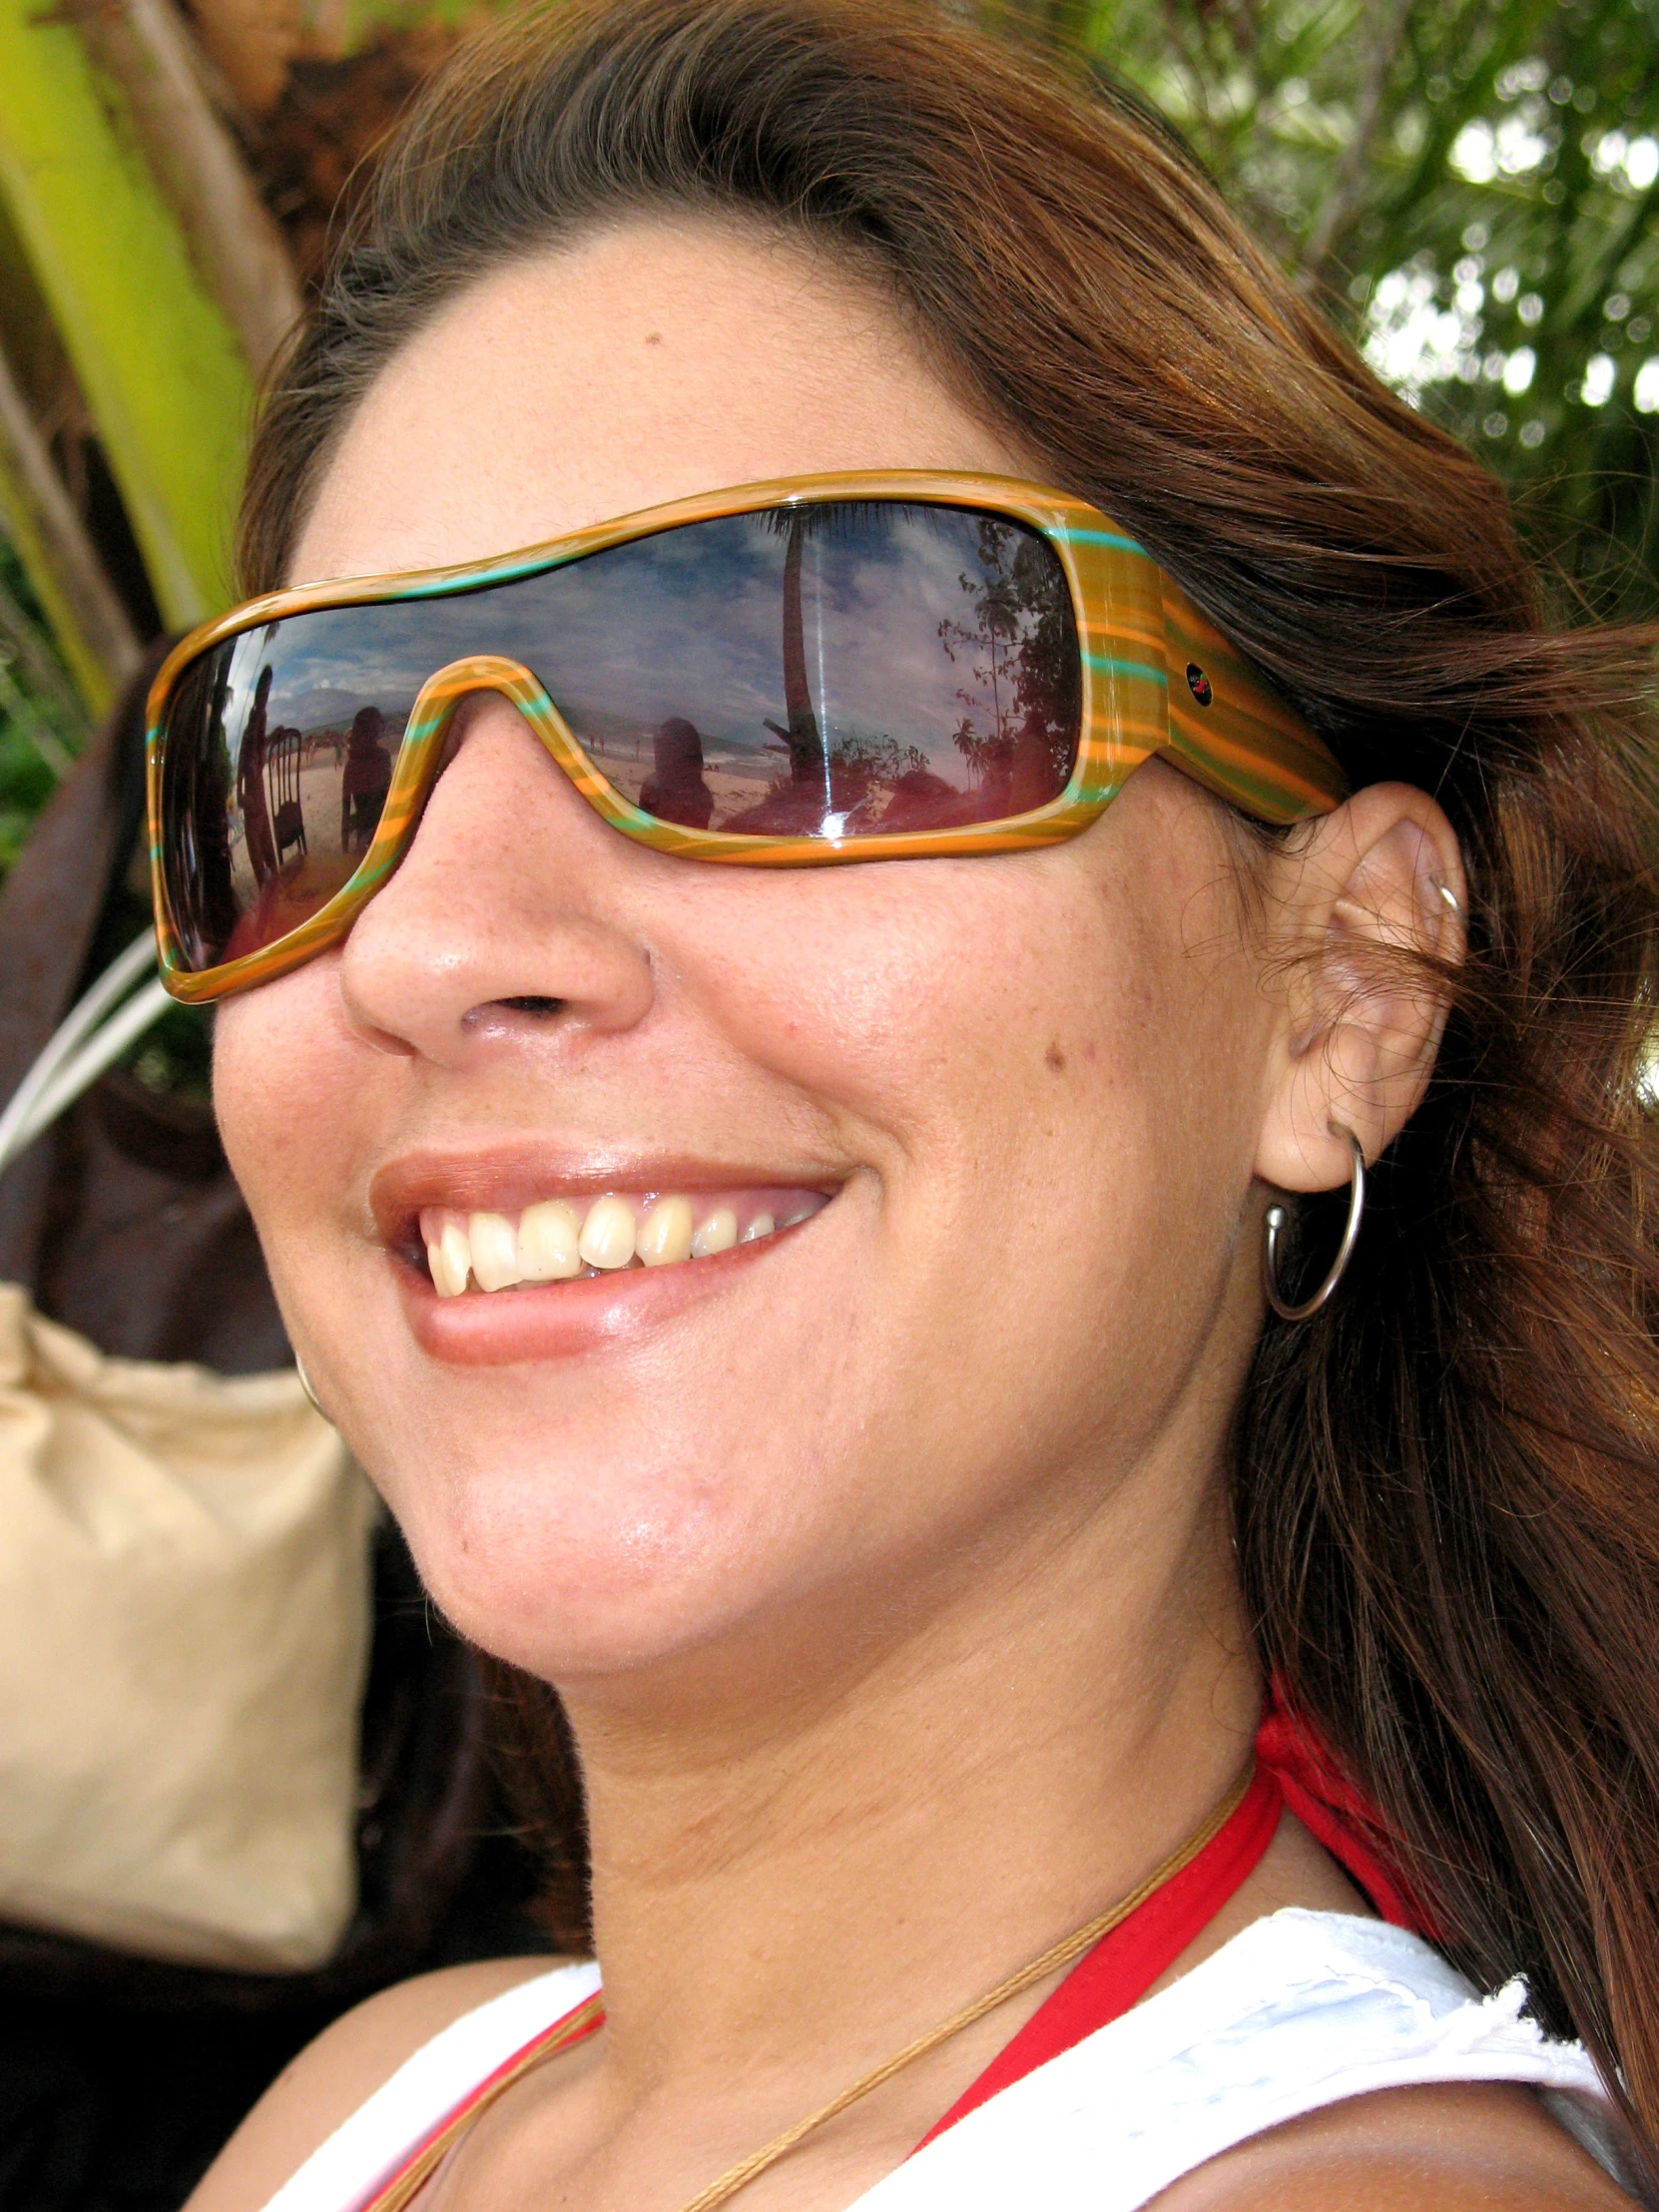 smiling woman wearing sun glasses in outdoor setting